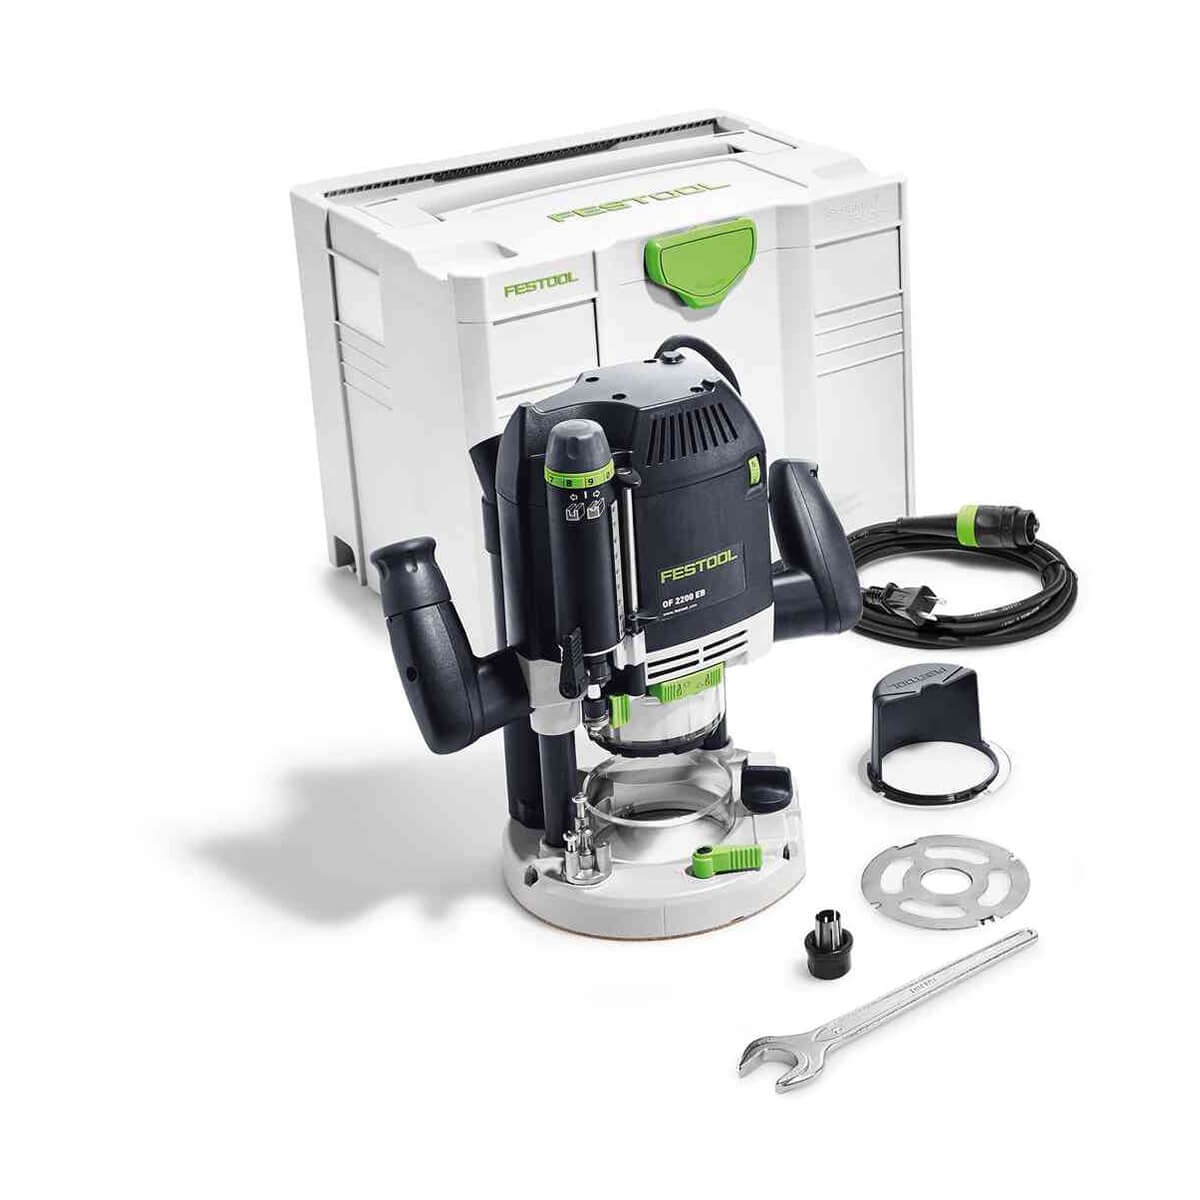 Festool 576223 Plunge Router OF 2200 EB Plunge Router Imperial